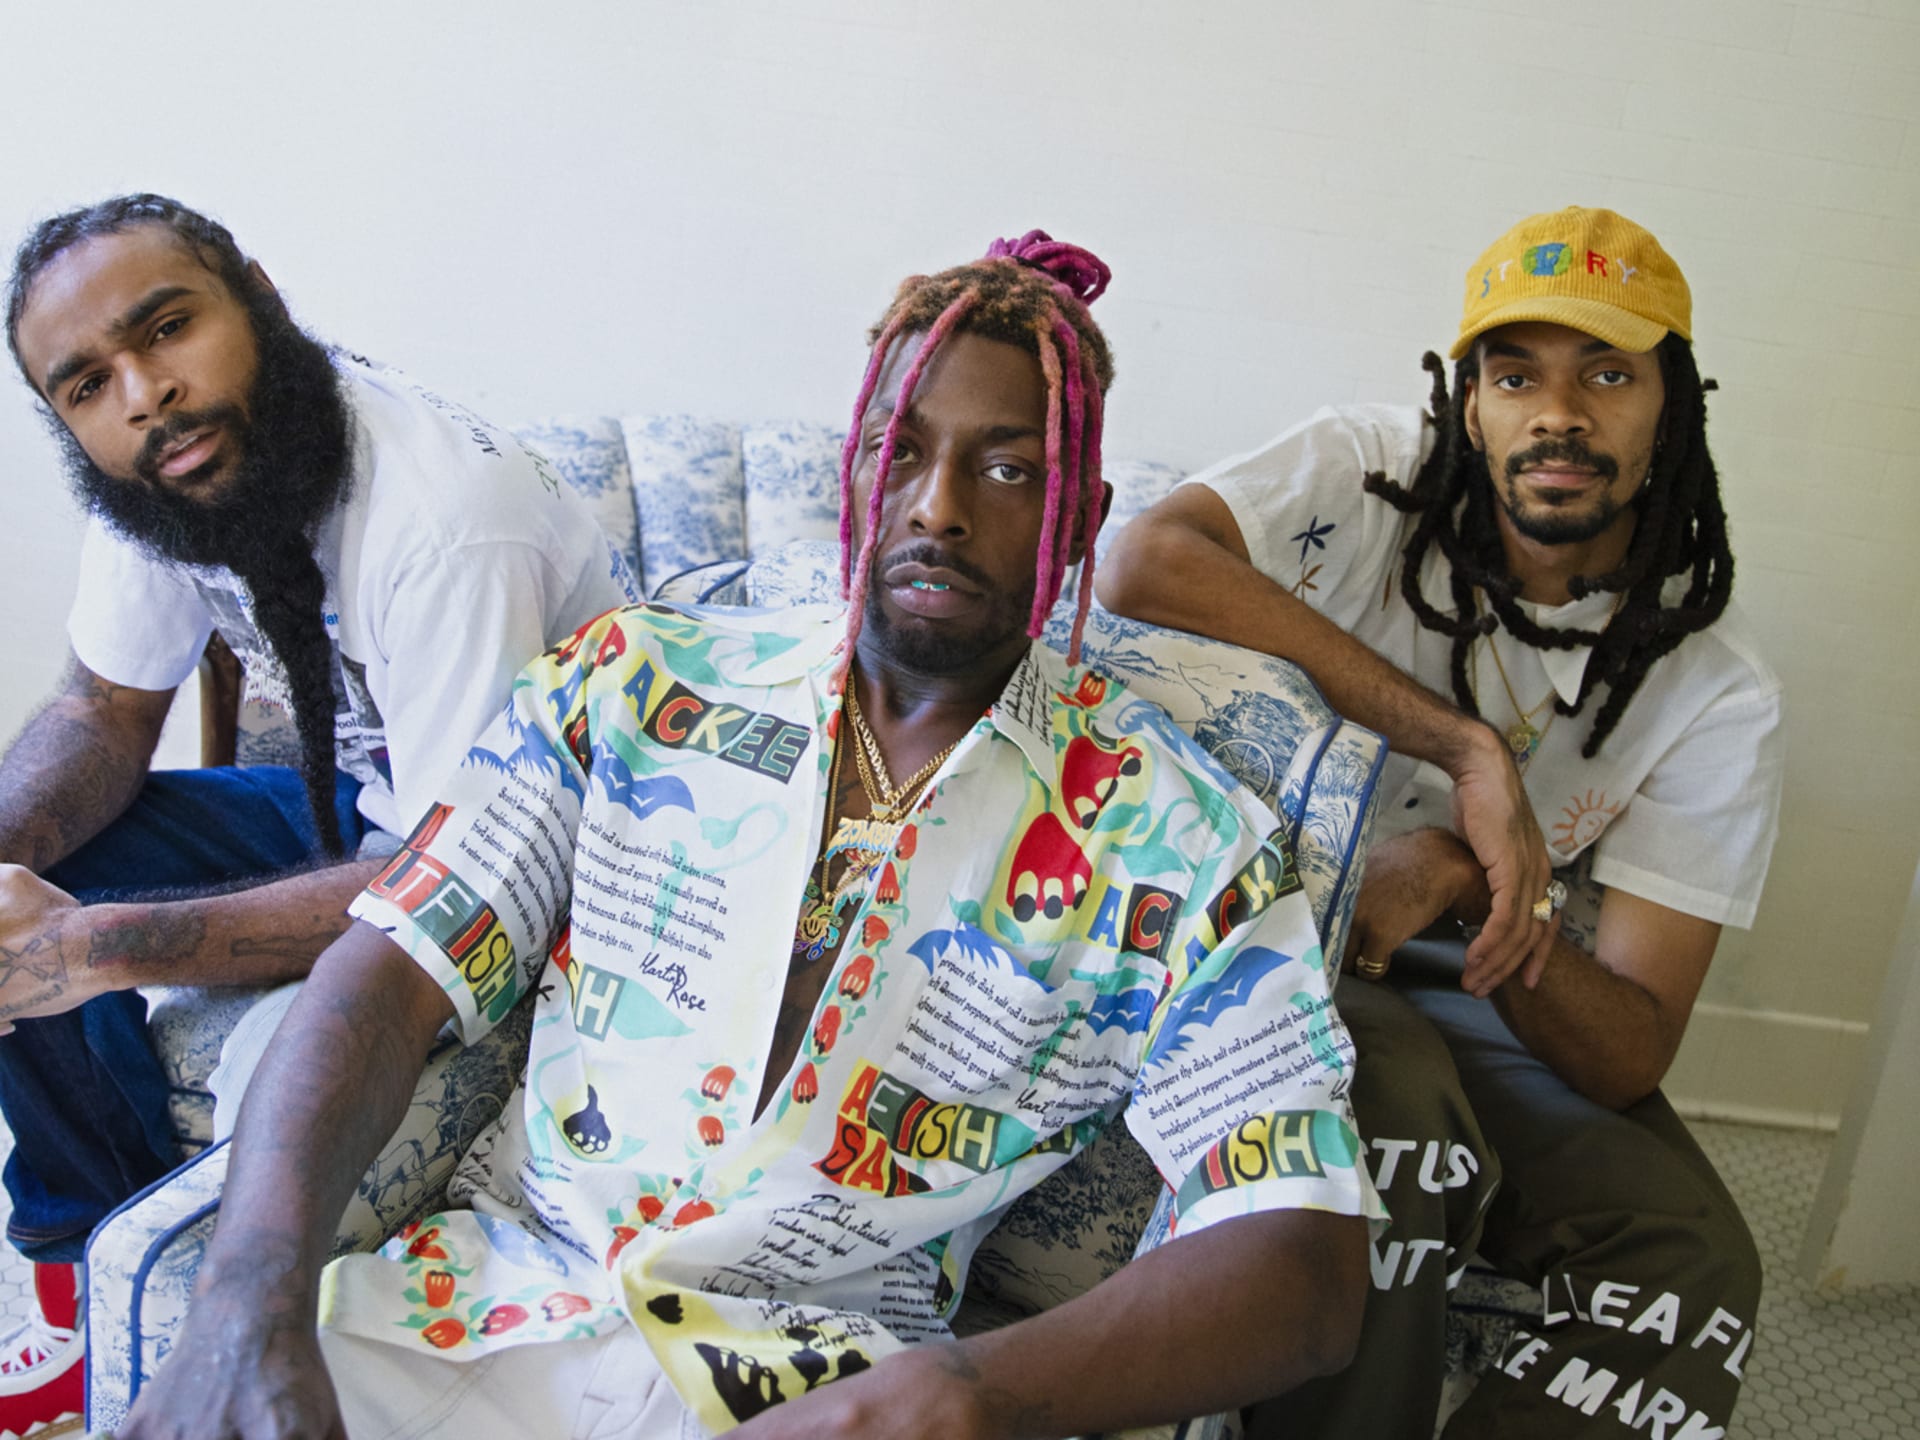 Flatbush Zombies Are for the People Complex